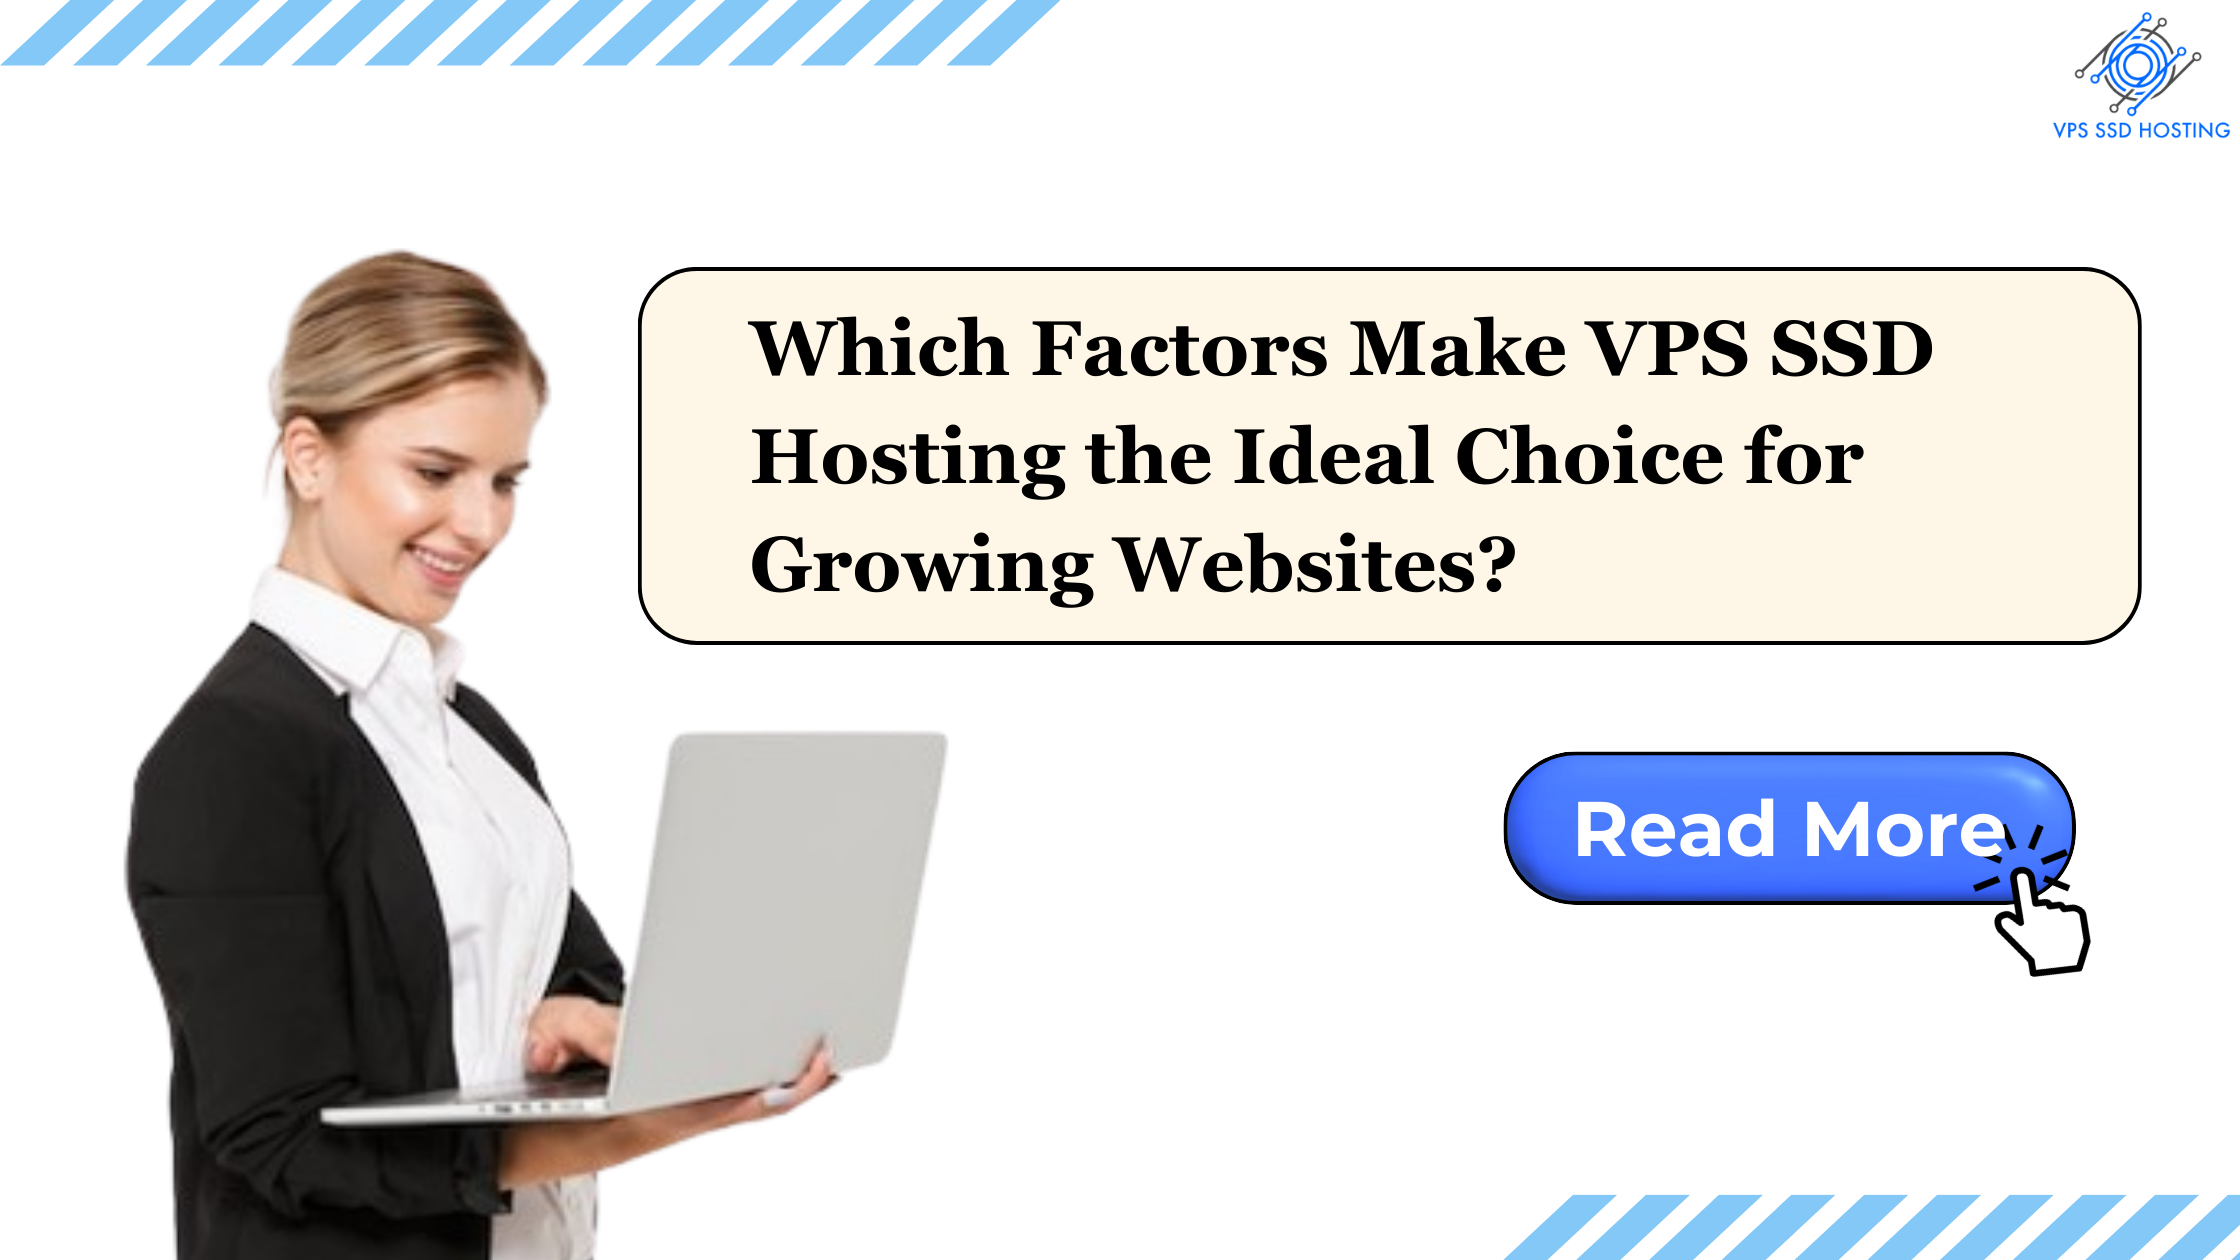 Which Factors Make VPS SSD Hosting the Ideal Choice for Growing Websites